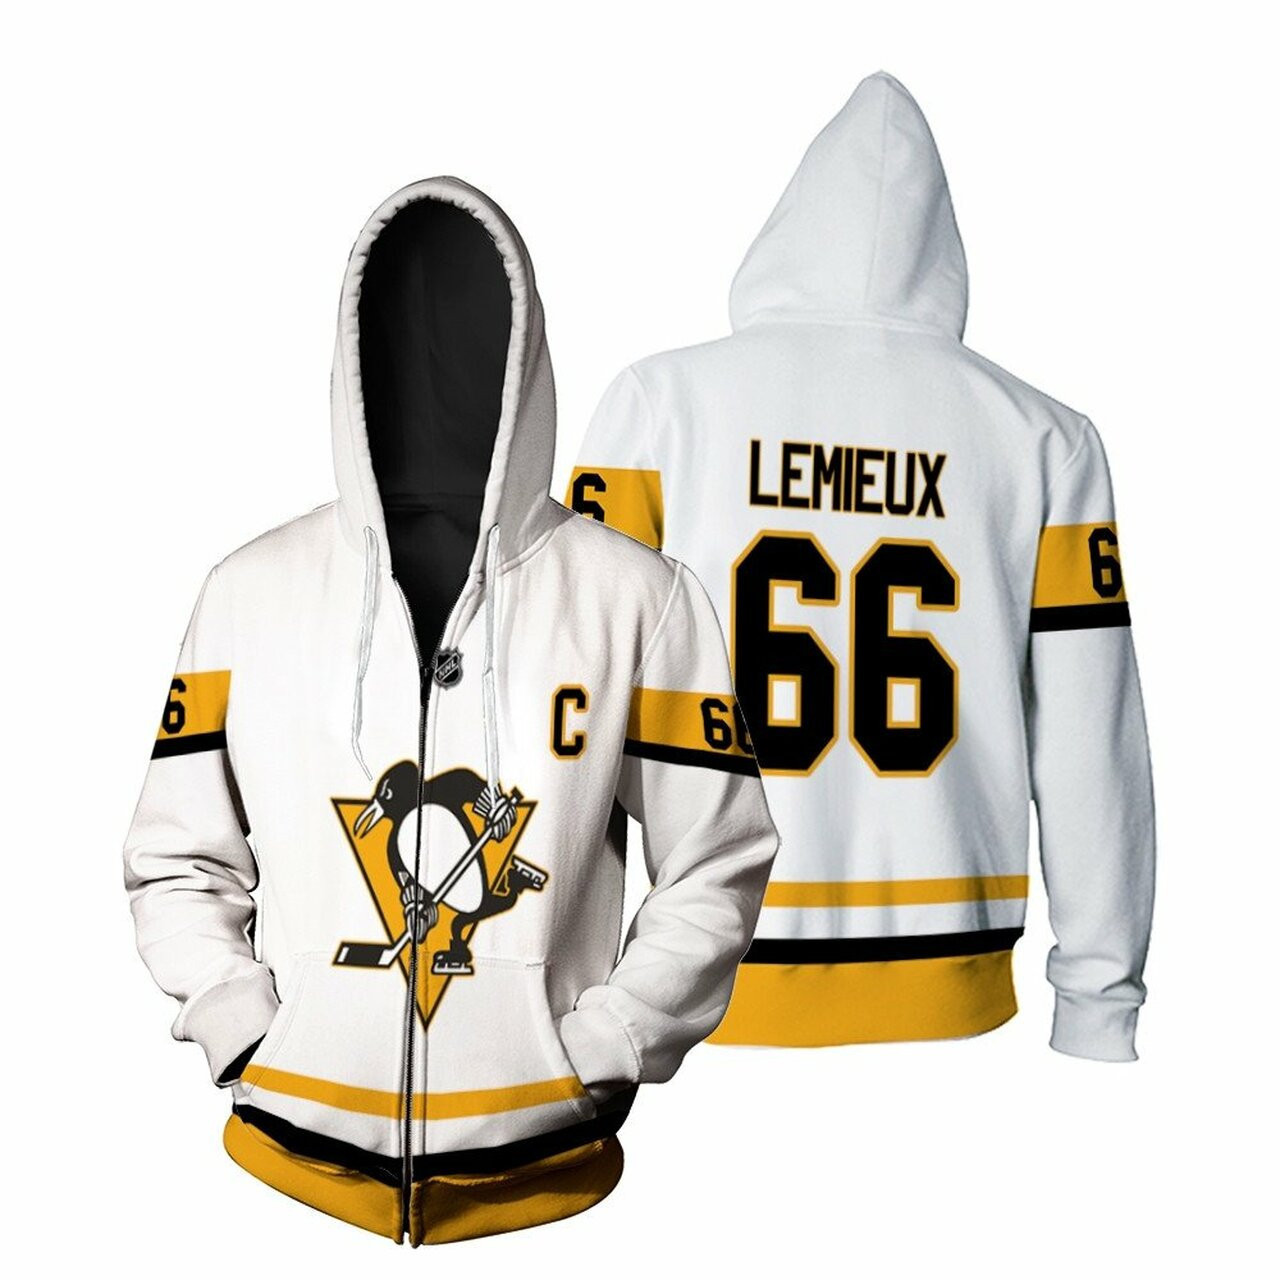 Pittsburgh Penguins Mario Lemieux 66 Nhl Ice Hockey Team 2020 White Jersey Style Gift For Penguins Fans Zip Hoodie